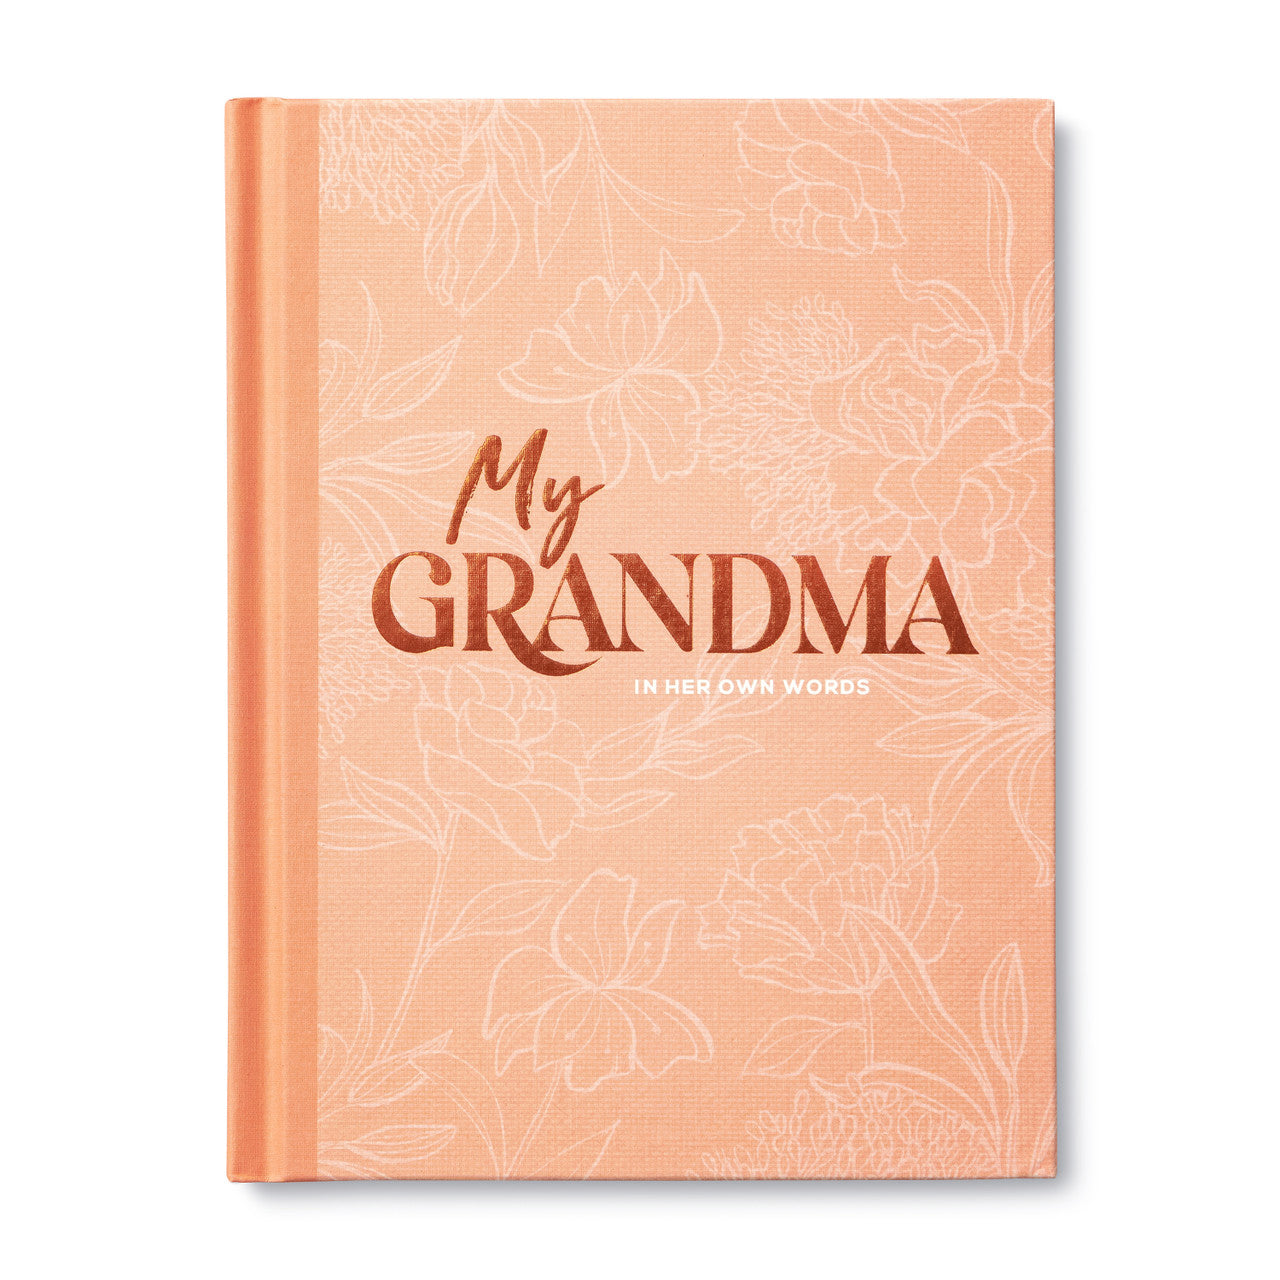 MY GRANDMA- An Interview Journal to Capture Reflections in Her Own Words